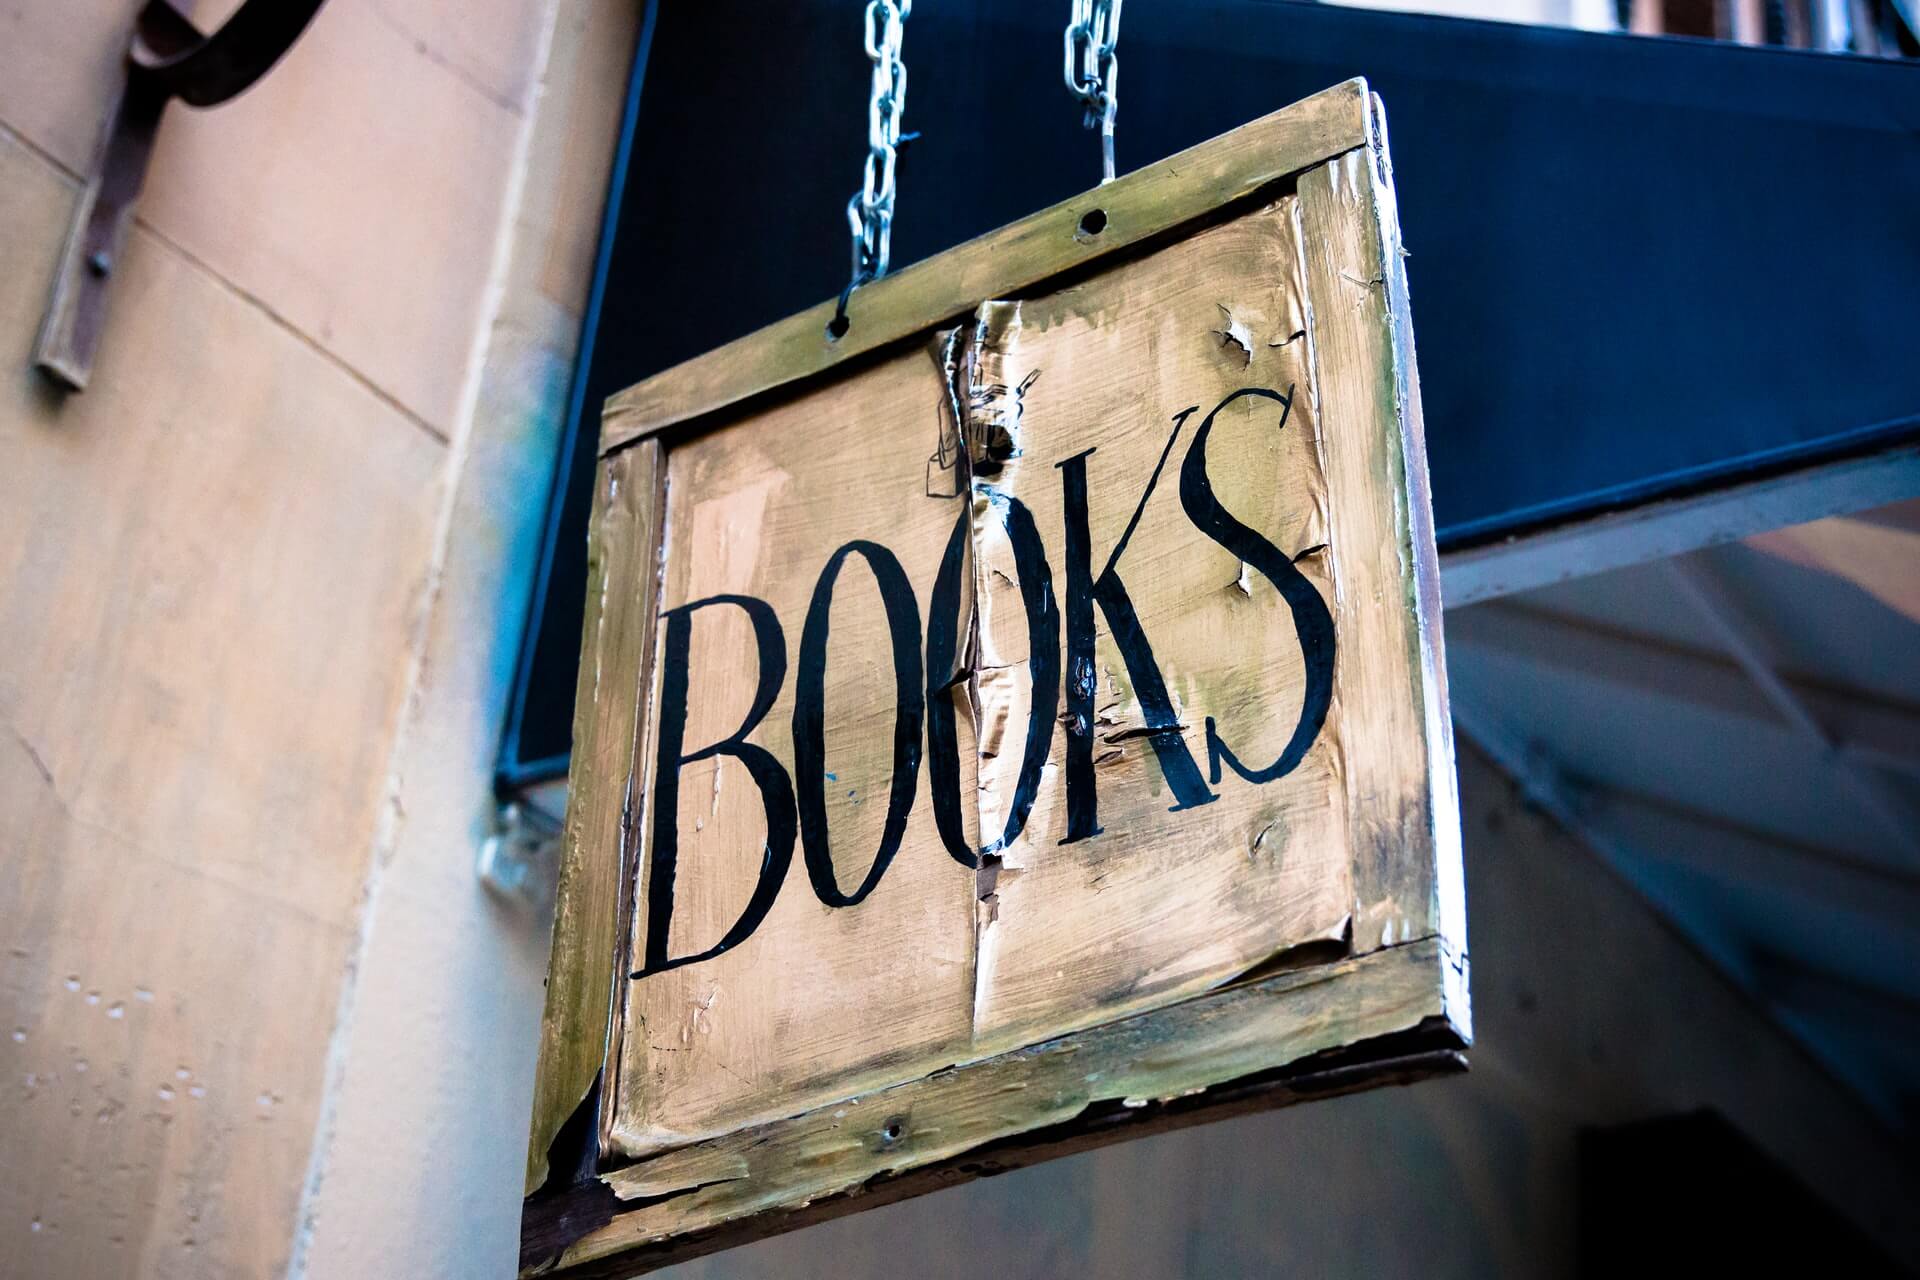 A sign reading "books".